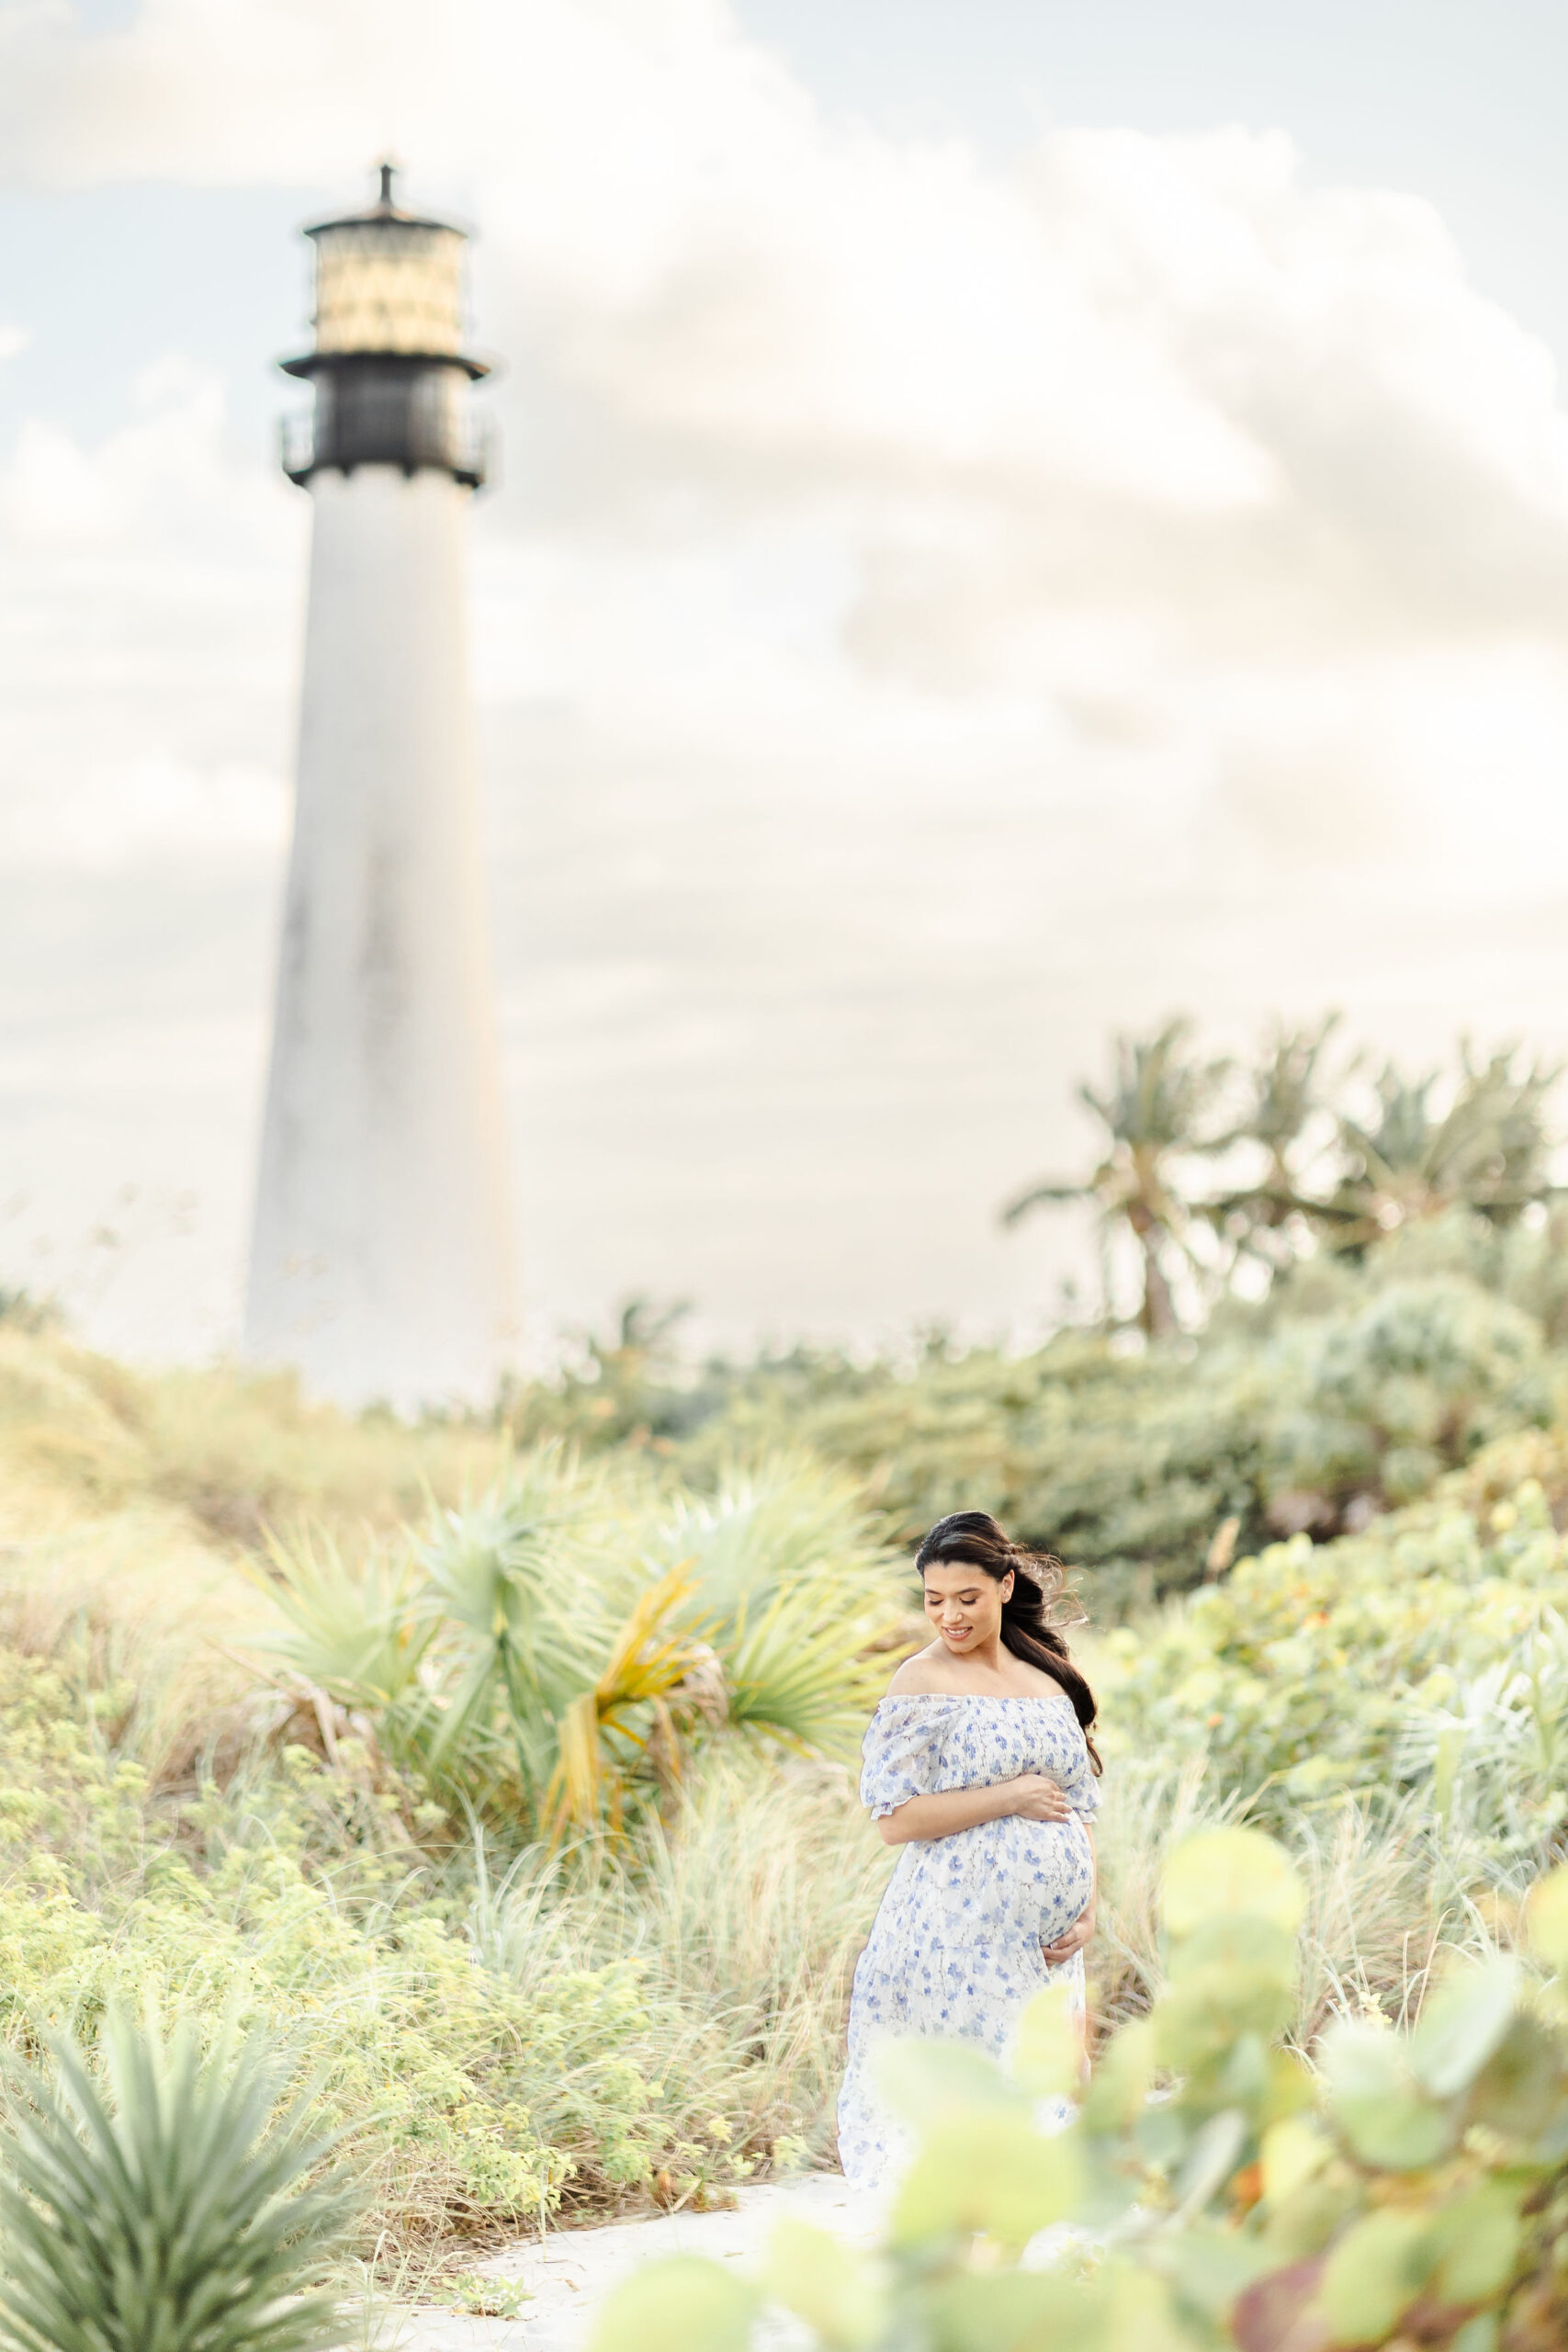 A mother to be walks in a windy beach path by a lighthouse while holding her bump at sunset thanks to a fertility clinic miami